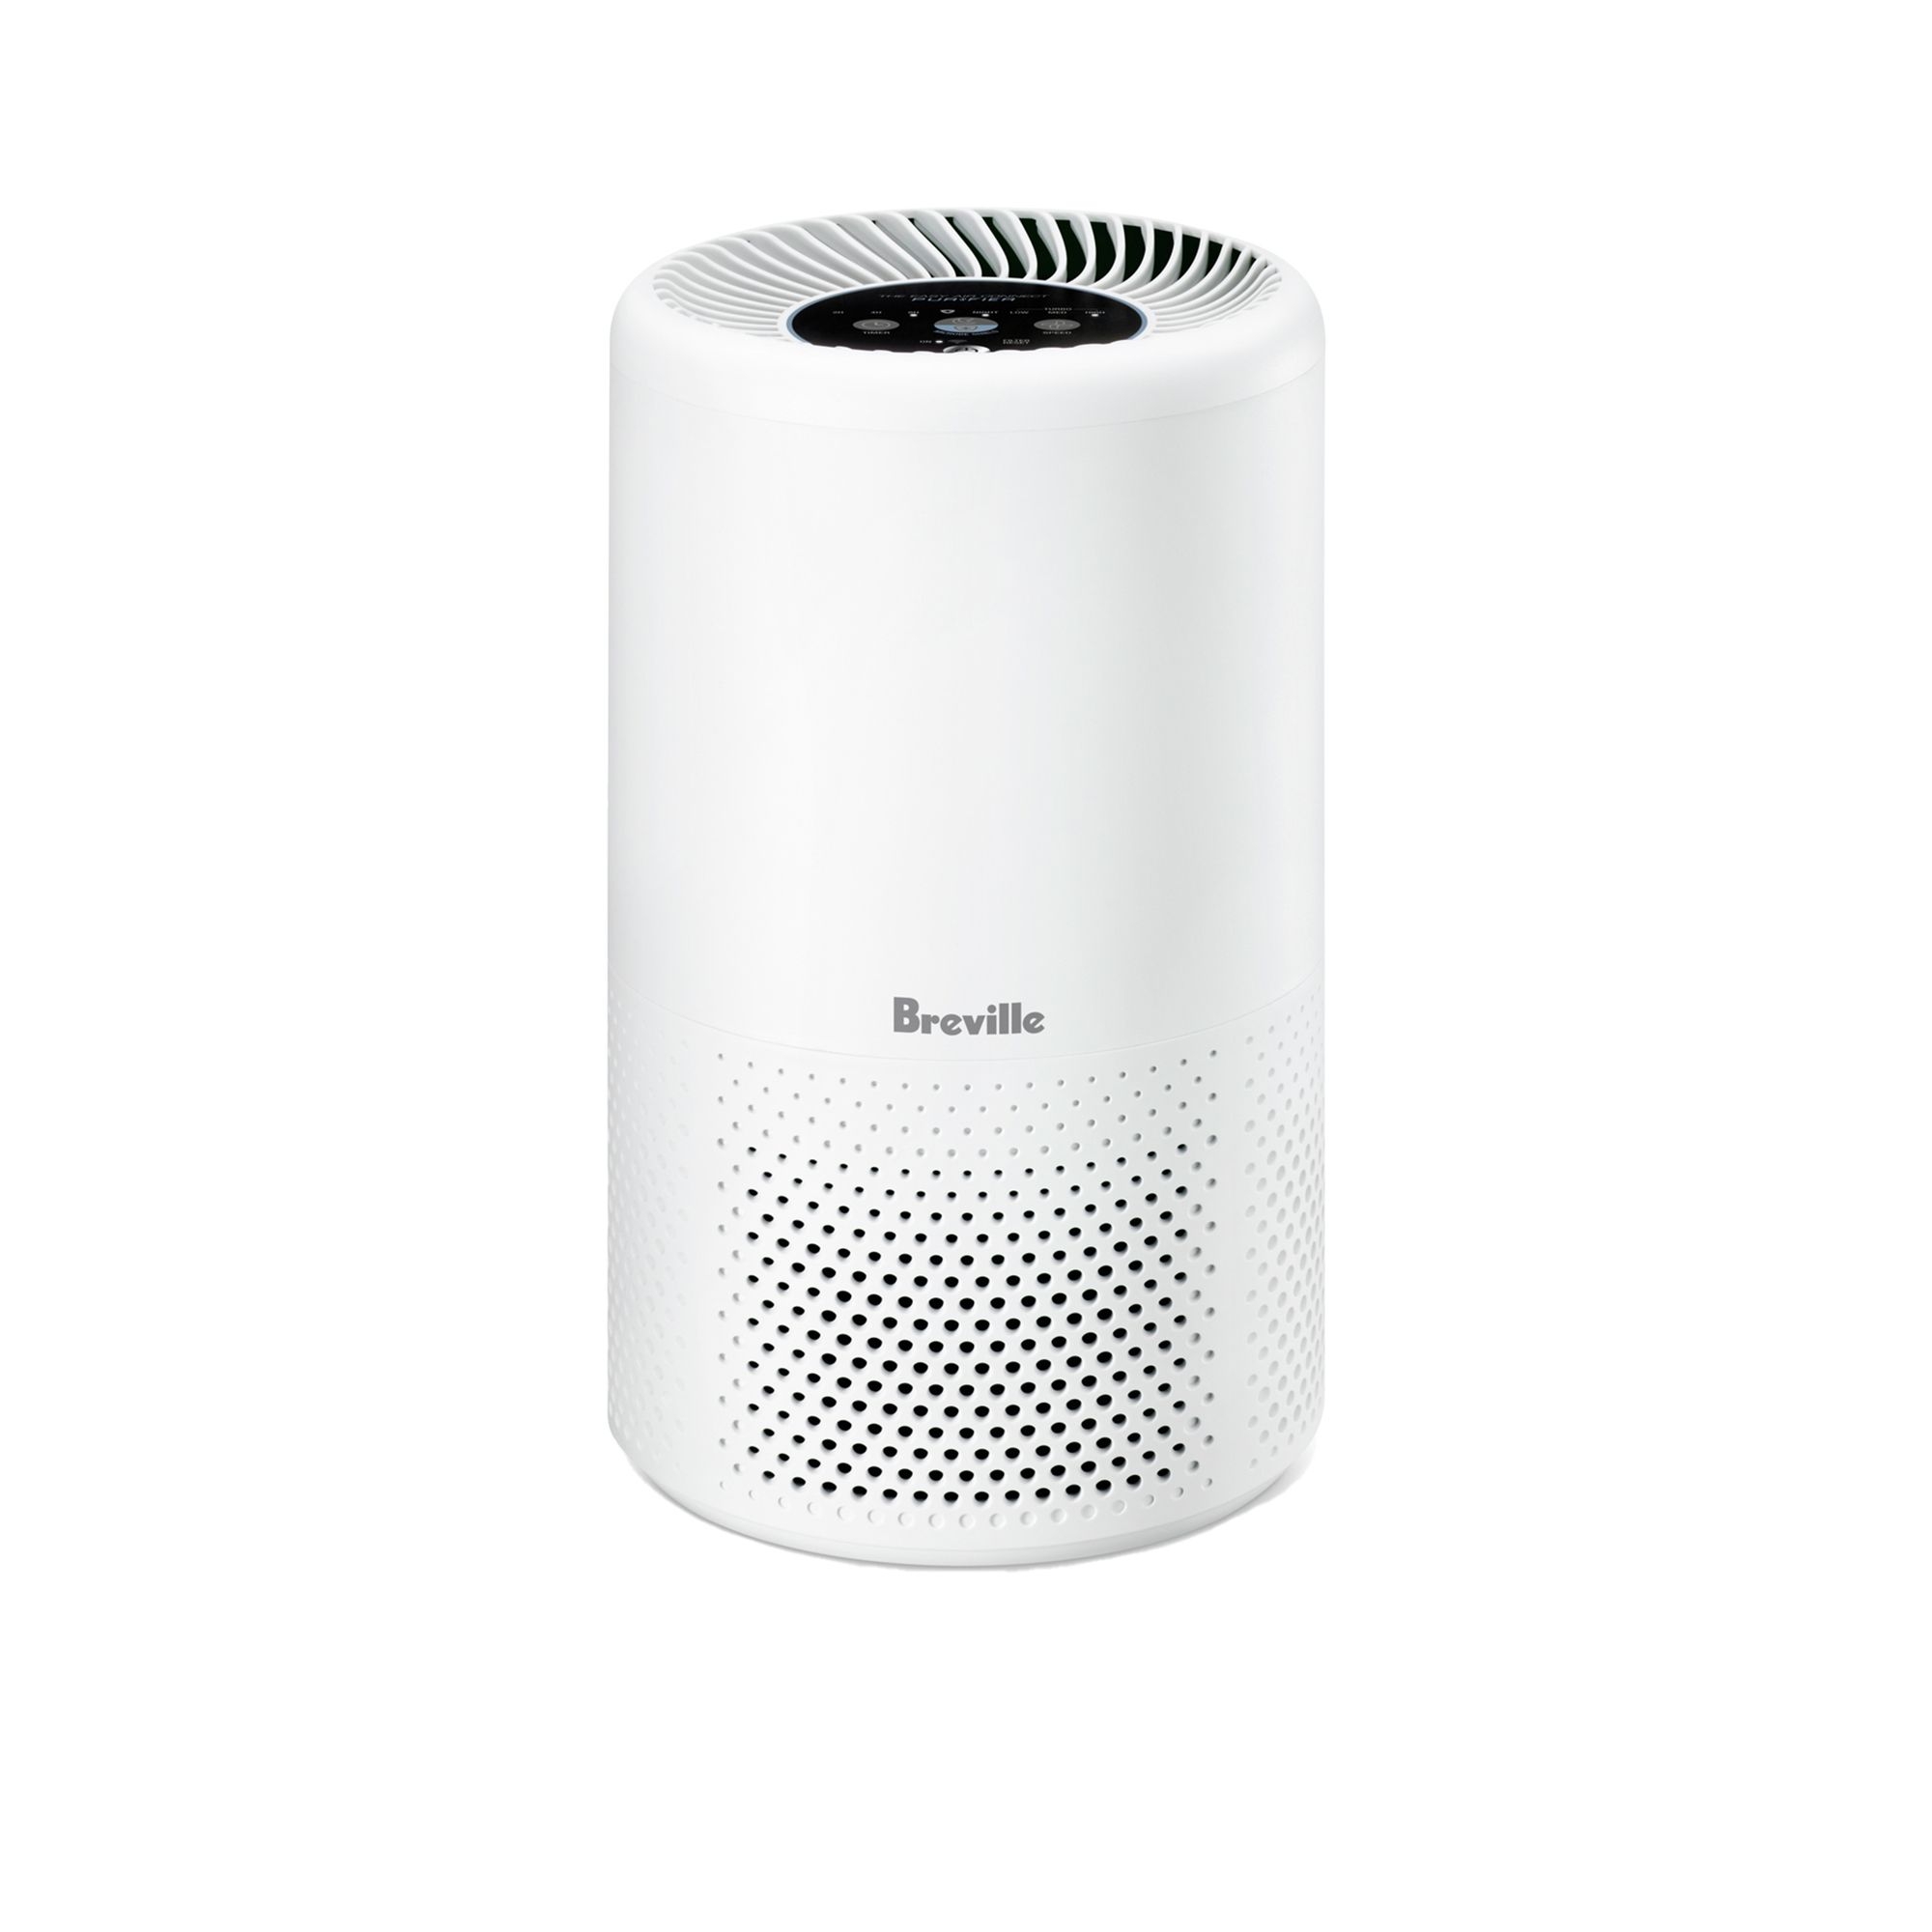 Breville The Easy Air Connect Purifier with Wi-Fi CADR 91m3/h Image 1